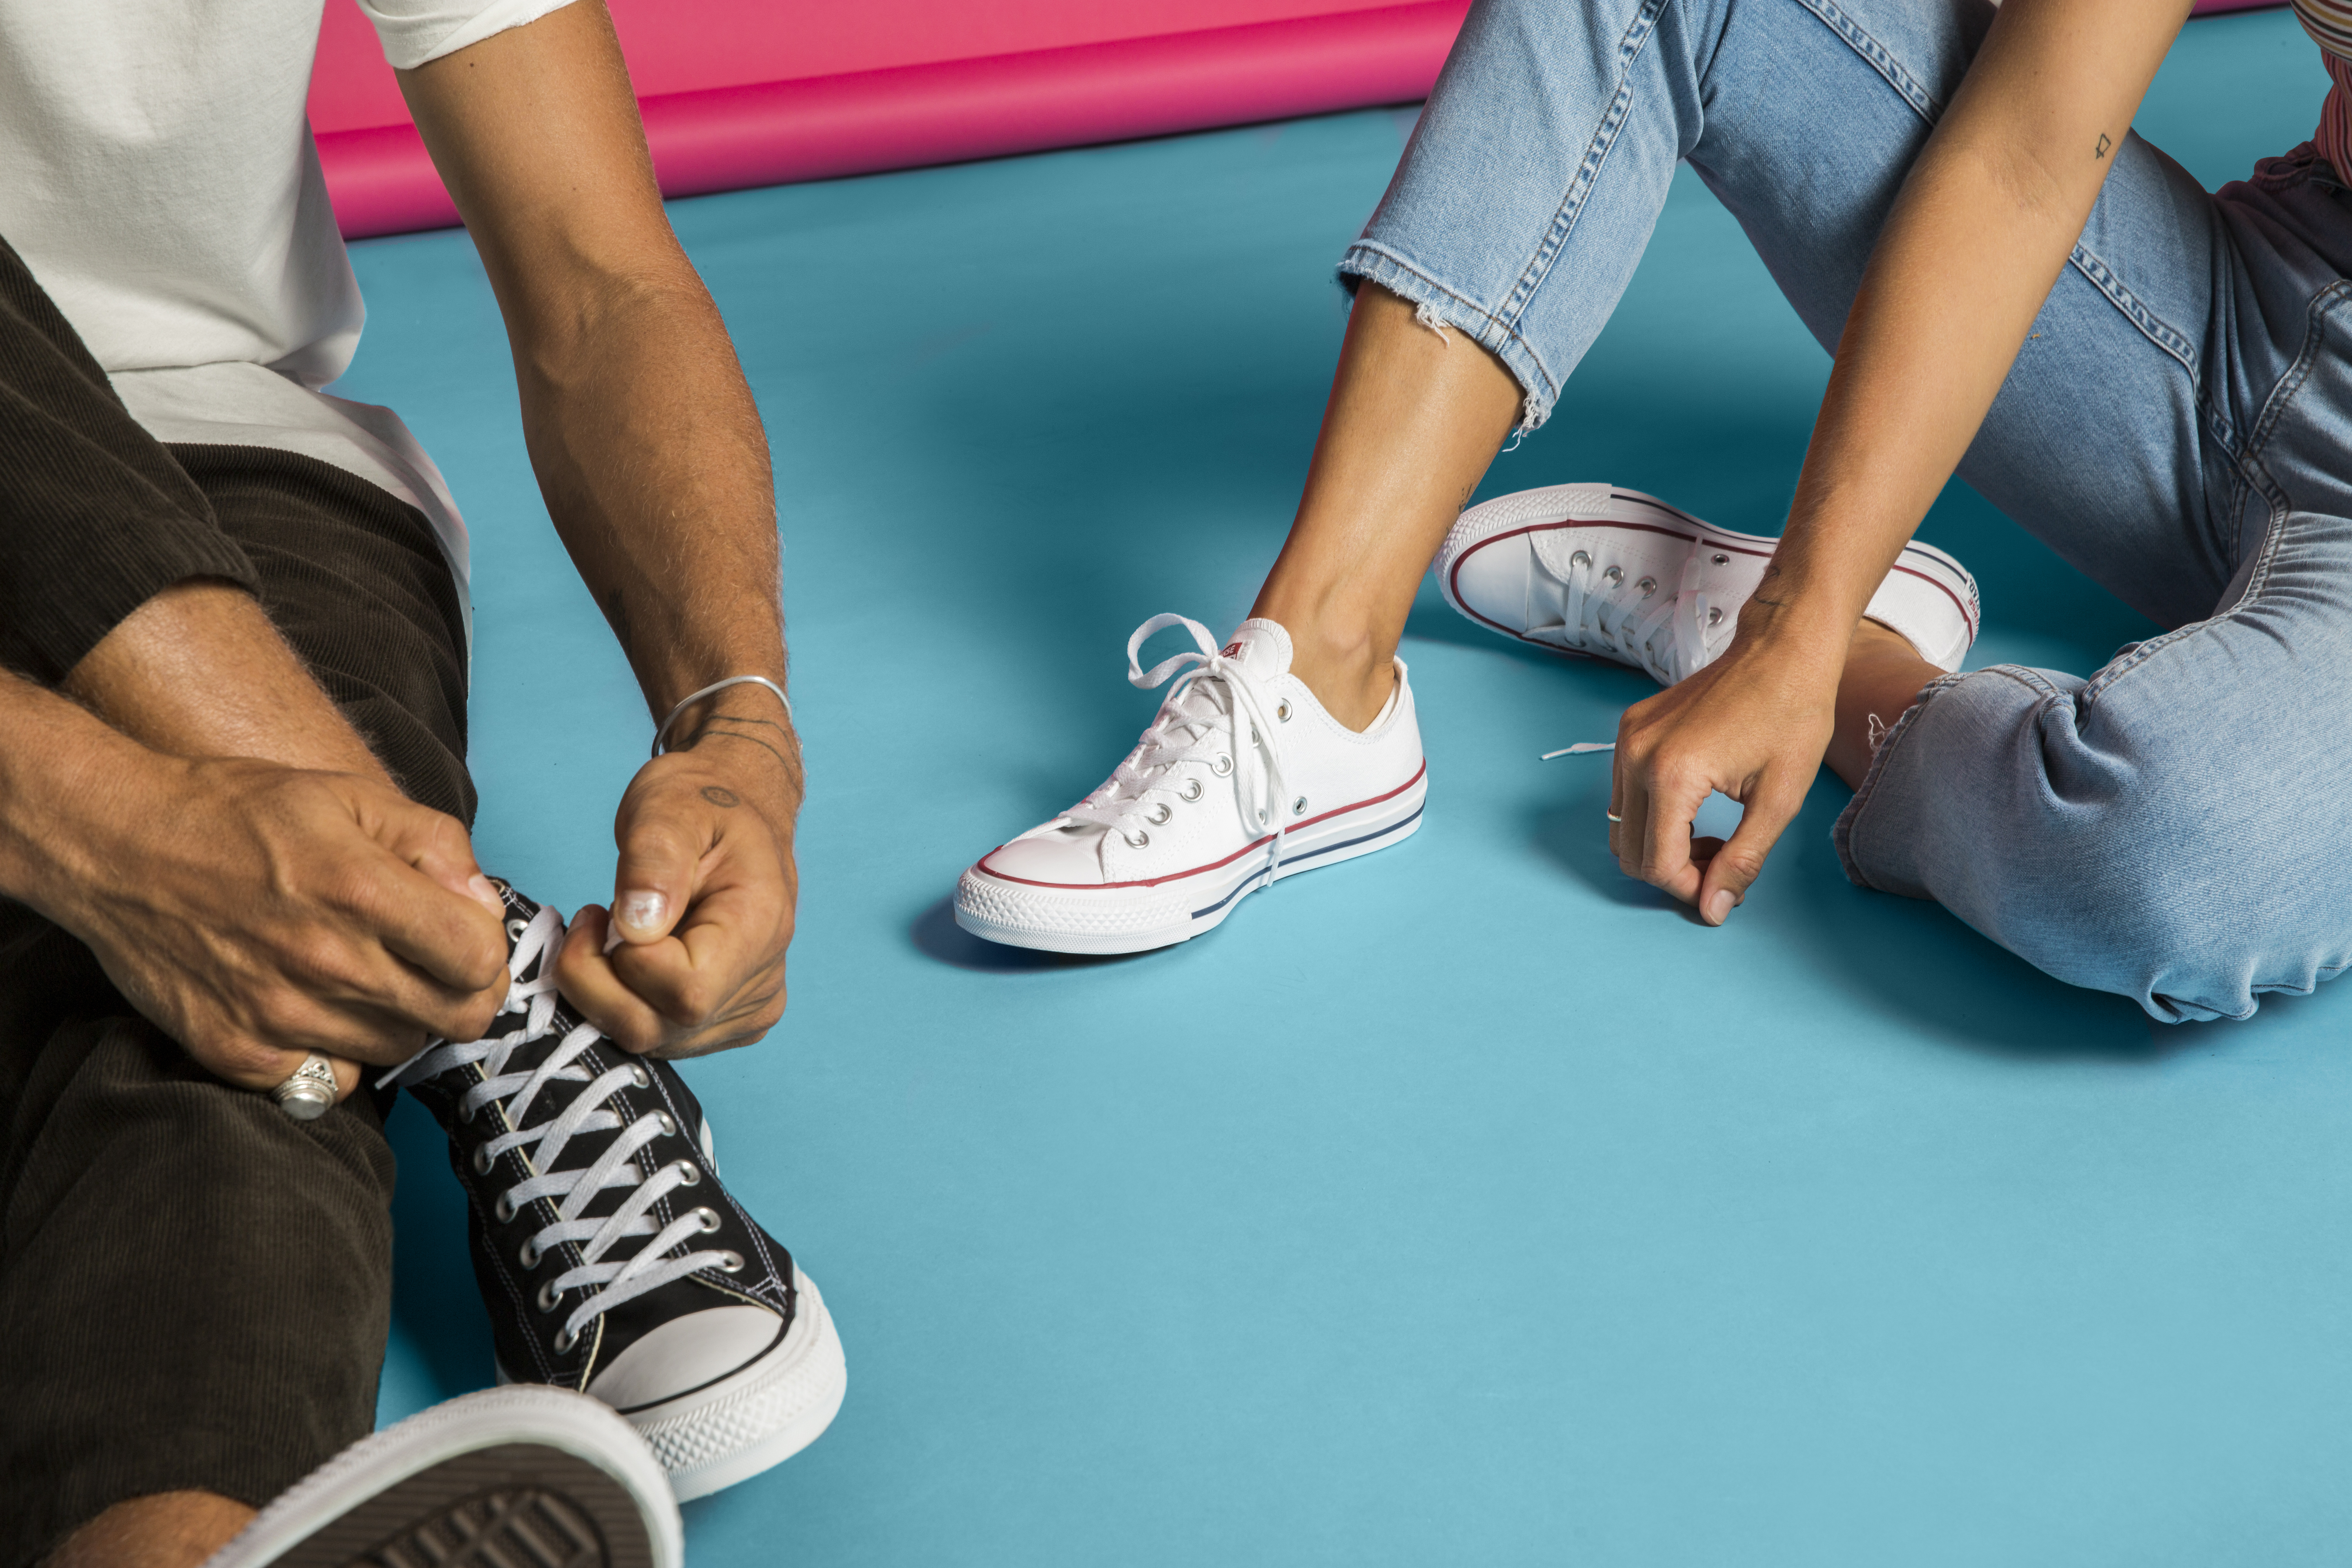 How To: Style Your Converse Chuck Taylor's